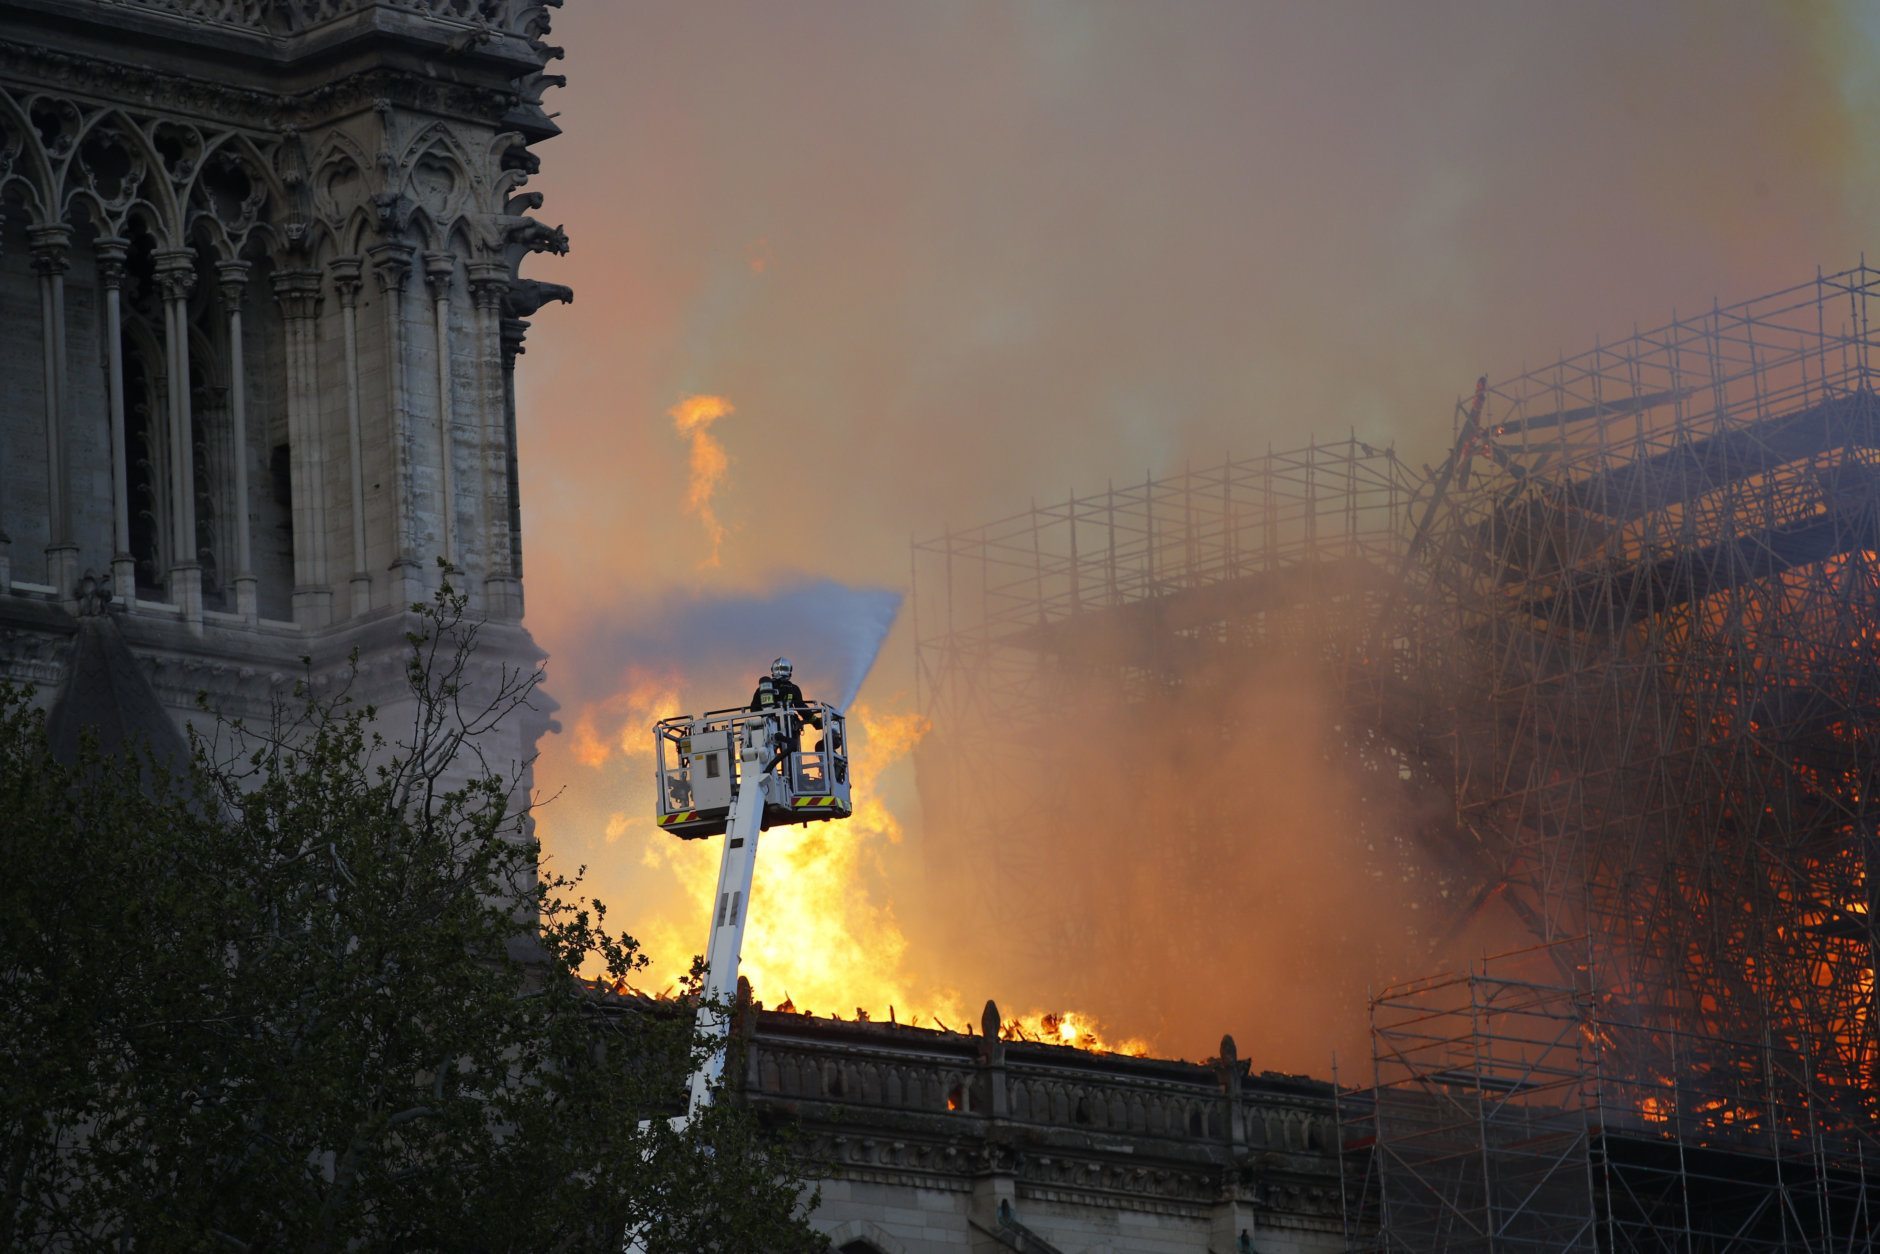 A firefighter uses a hose as Notre Dame cathedral burns in Paris, Monday, April 15, 2019. A catastrophic fire engulfed the upper reaches of Paris' soaring Notre Dame Cathedral as it was undergoing renovations Monday, threatening one of the greatest architectural treasures of the Western world as tourists and Parisians looked on aghast from the streets below. (AP Photo/Francois Mori)